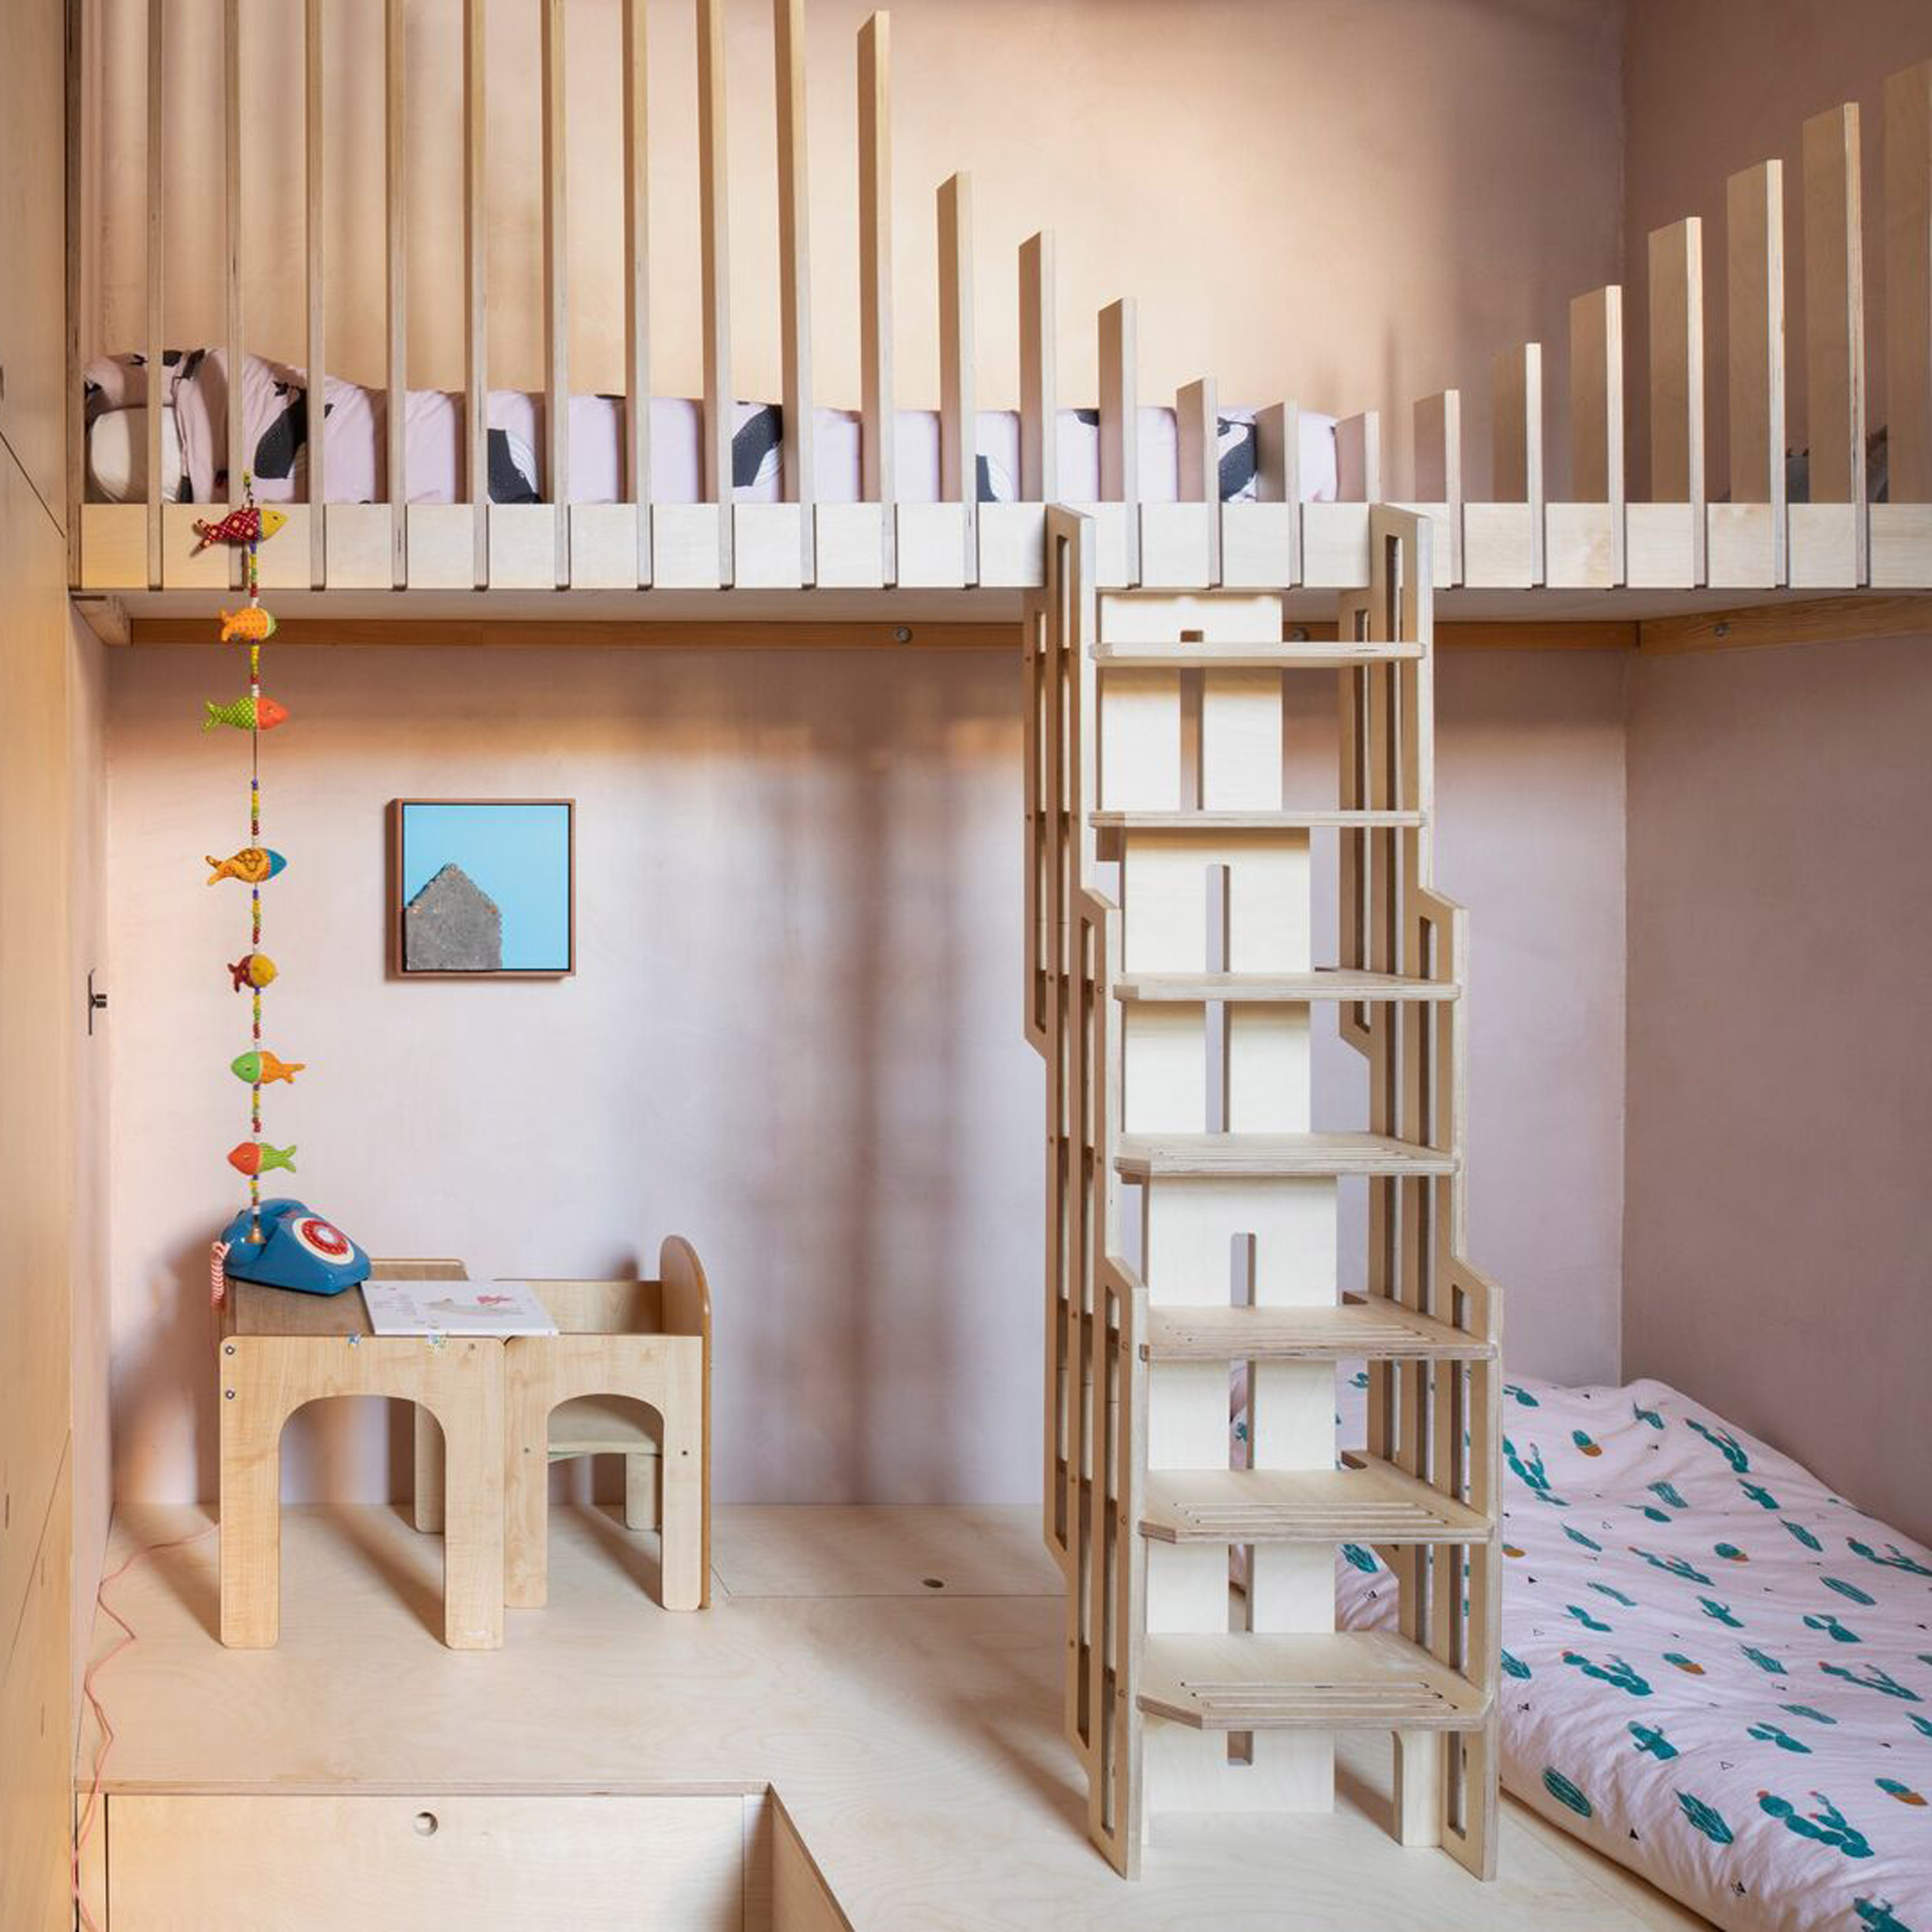 ROOM 2 BUILD SINGLE BED STORAGE KIDS WITH BUILDING BRICK FEATURES 